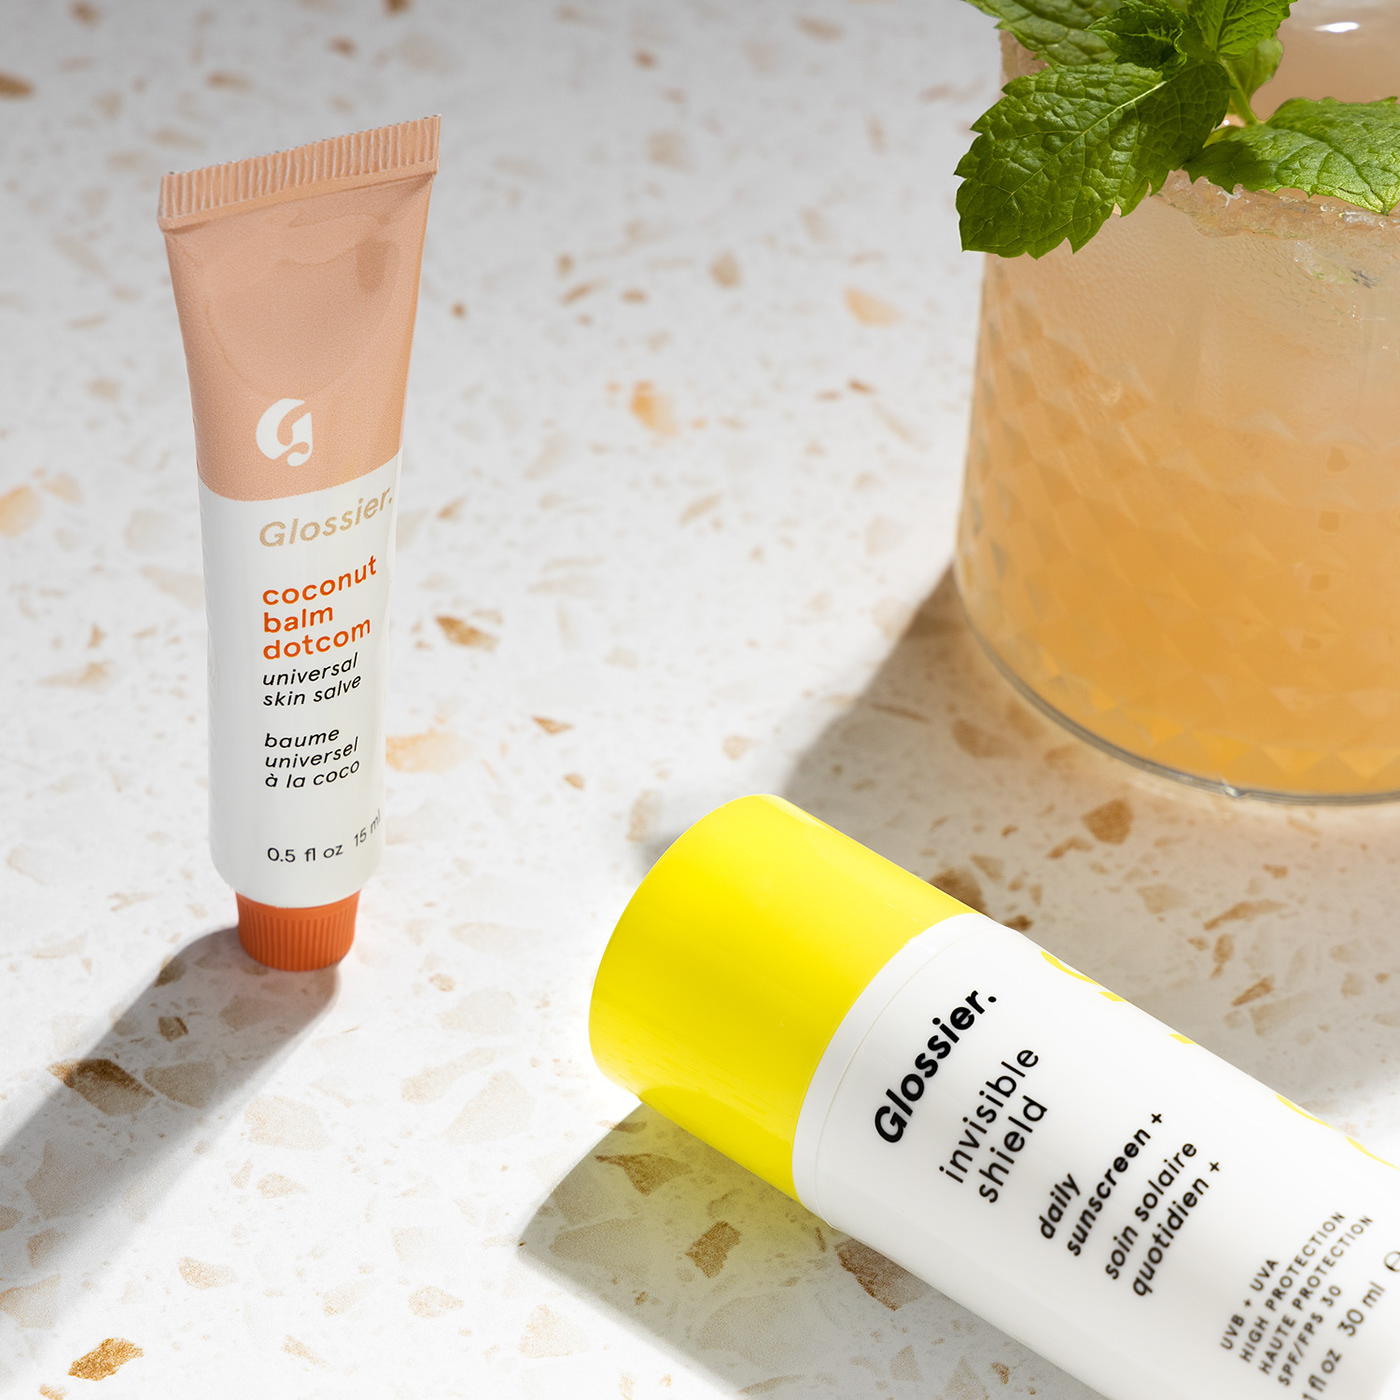 Glossier Brand Photography Coconut Balm Dotcom Invisible Shield Cocktail By The Pool